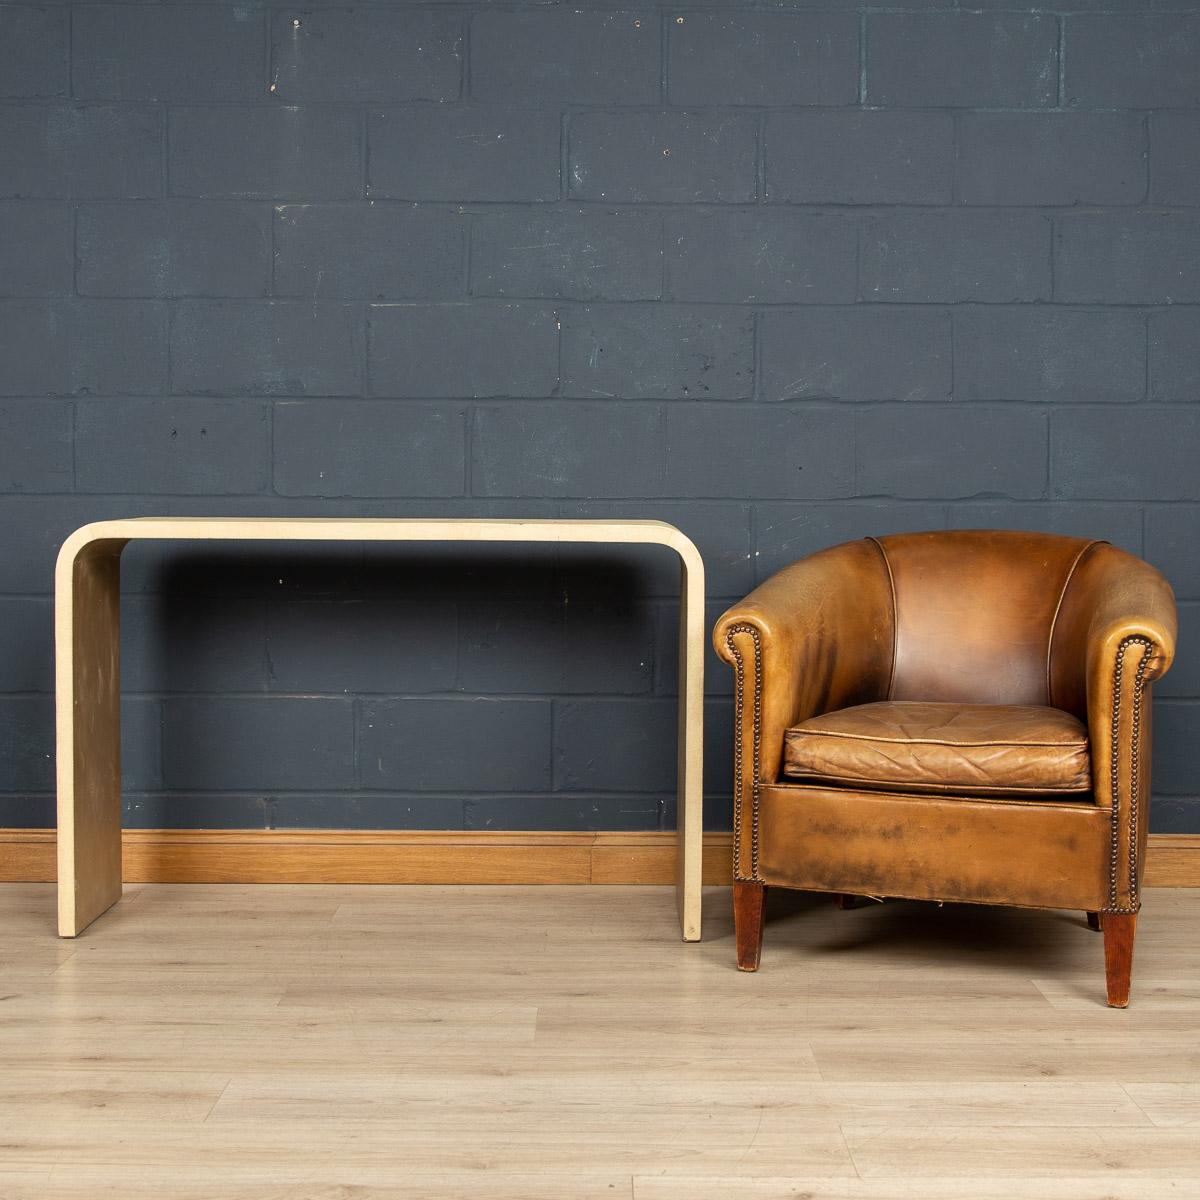 British 20th Century Art Deco Inspired Sideboards by Julian Chichester